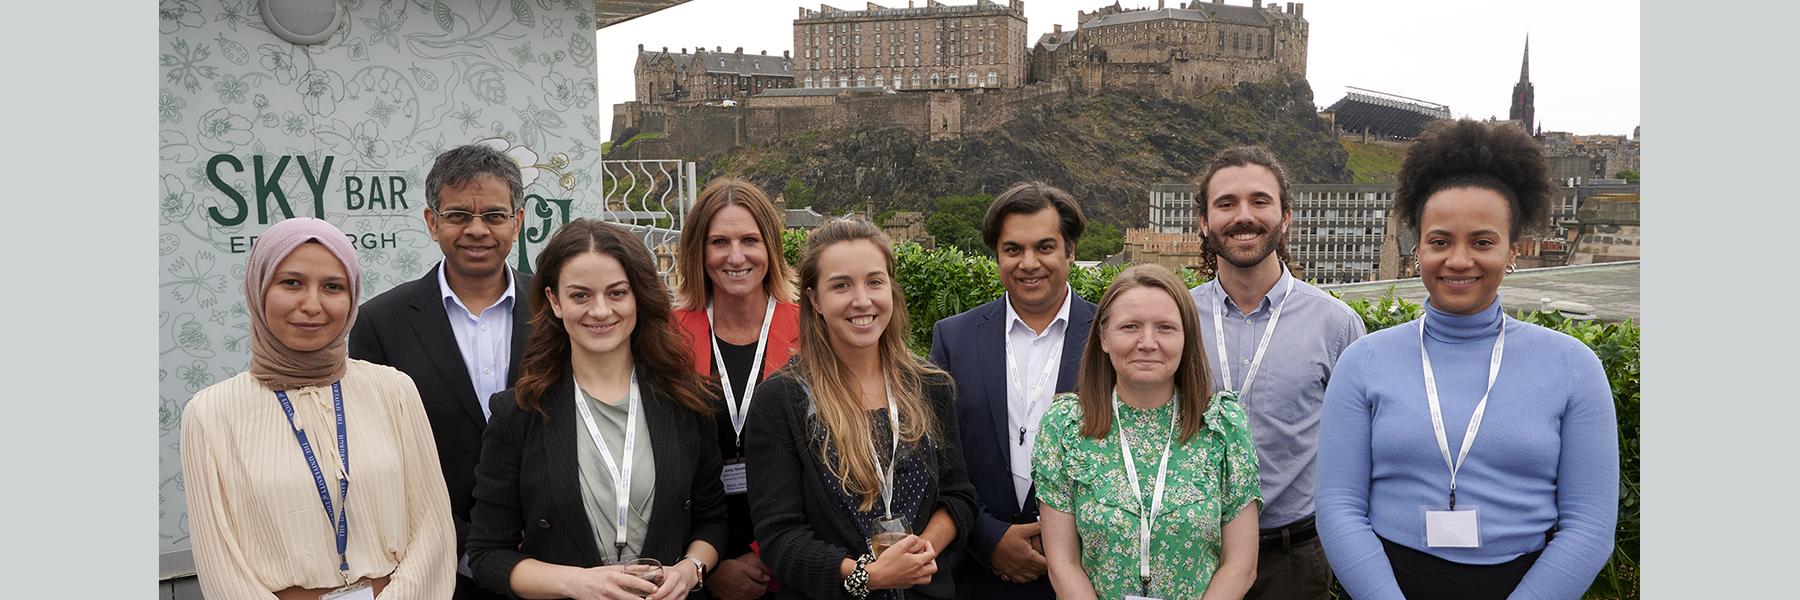 A group photo of 9 members of the MND-SMART core team, taken outside, with Edinburgh Castle in the background